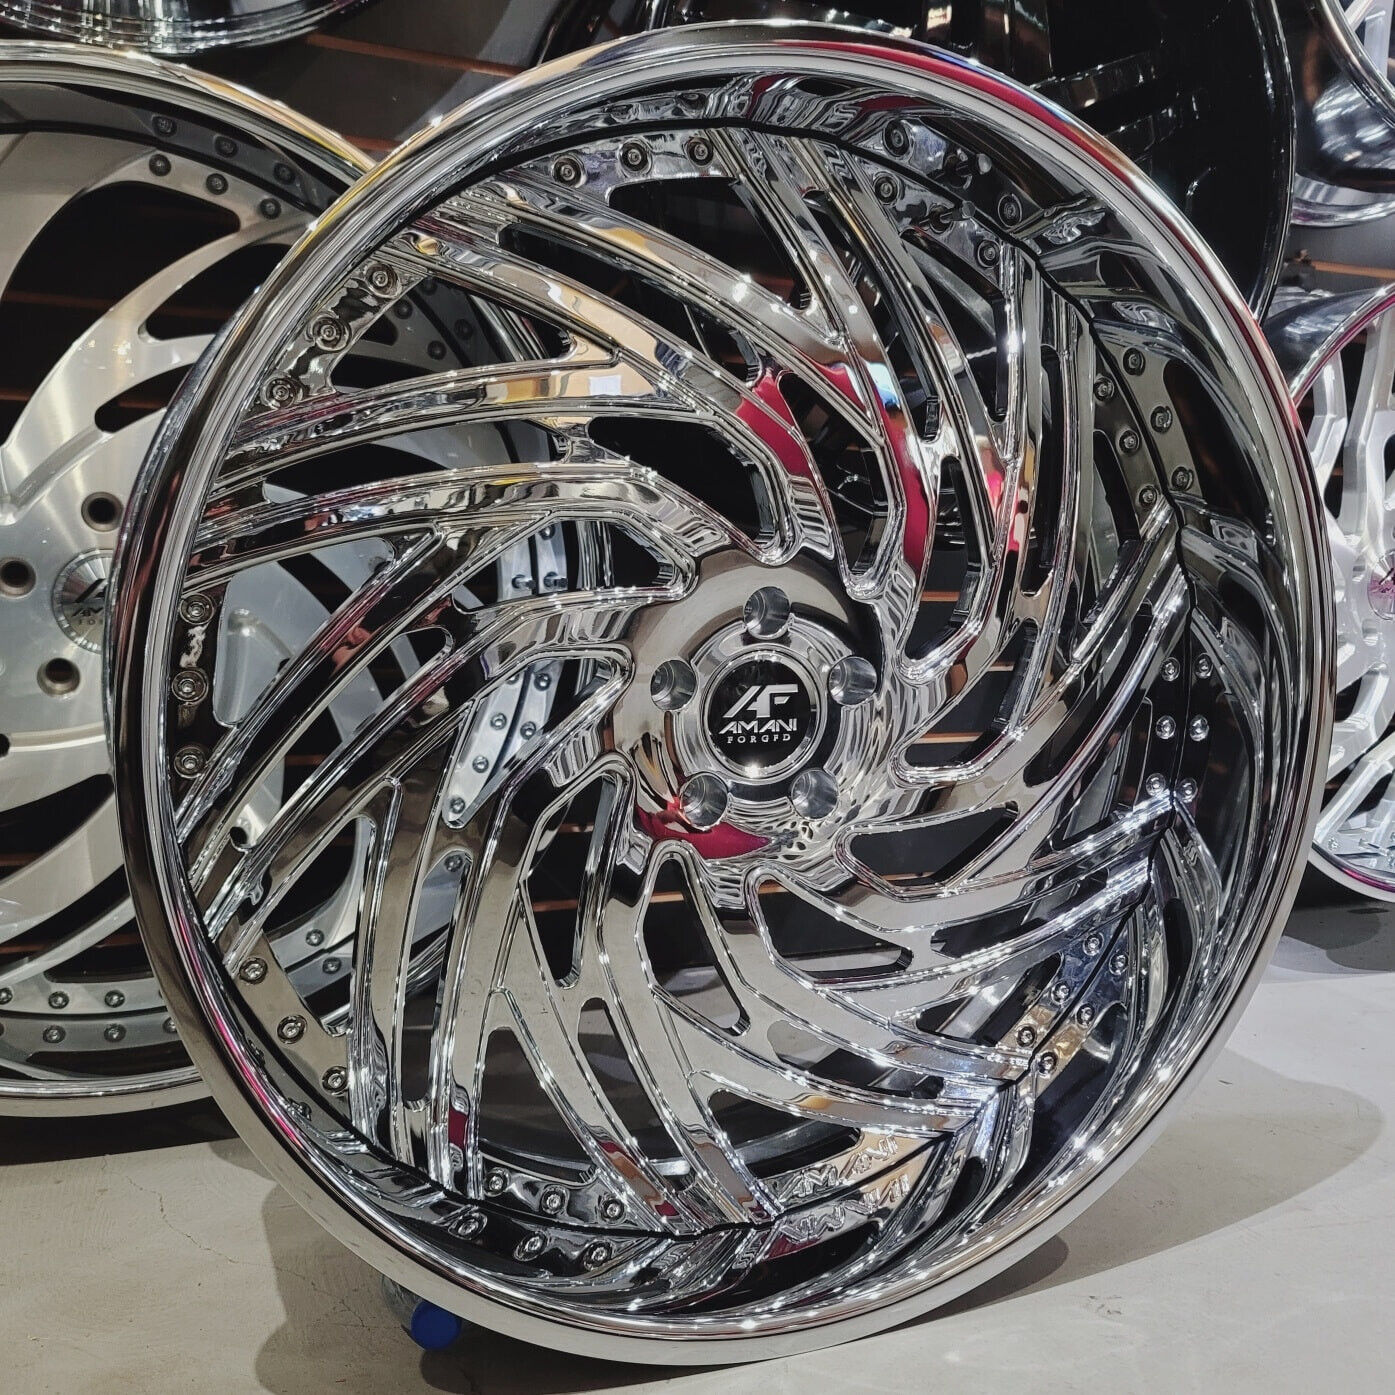 26 AMANI FORGED W TIRES  Box Chevy Impala Caprice Cutlass Chevelle IN STOCK NOW